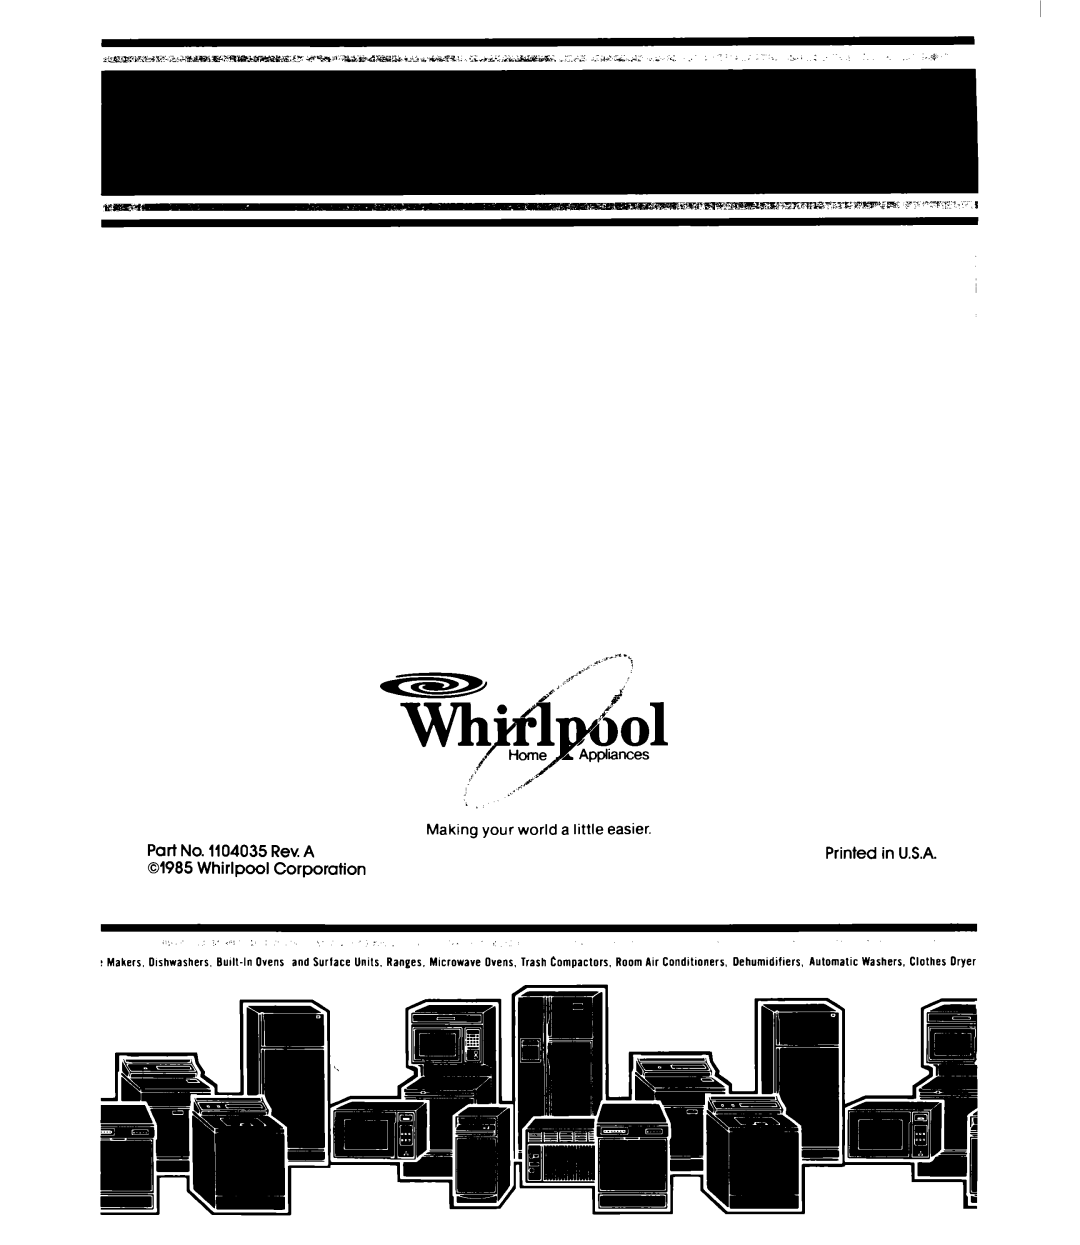 Whirlpool EVZOON Making your world a little easier, 01985, Pari No, Rev. A, Whirlpool, Corporation, Makers, Dlshrashers 